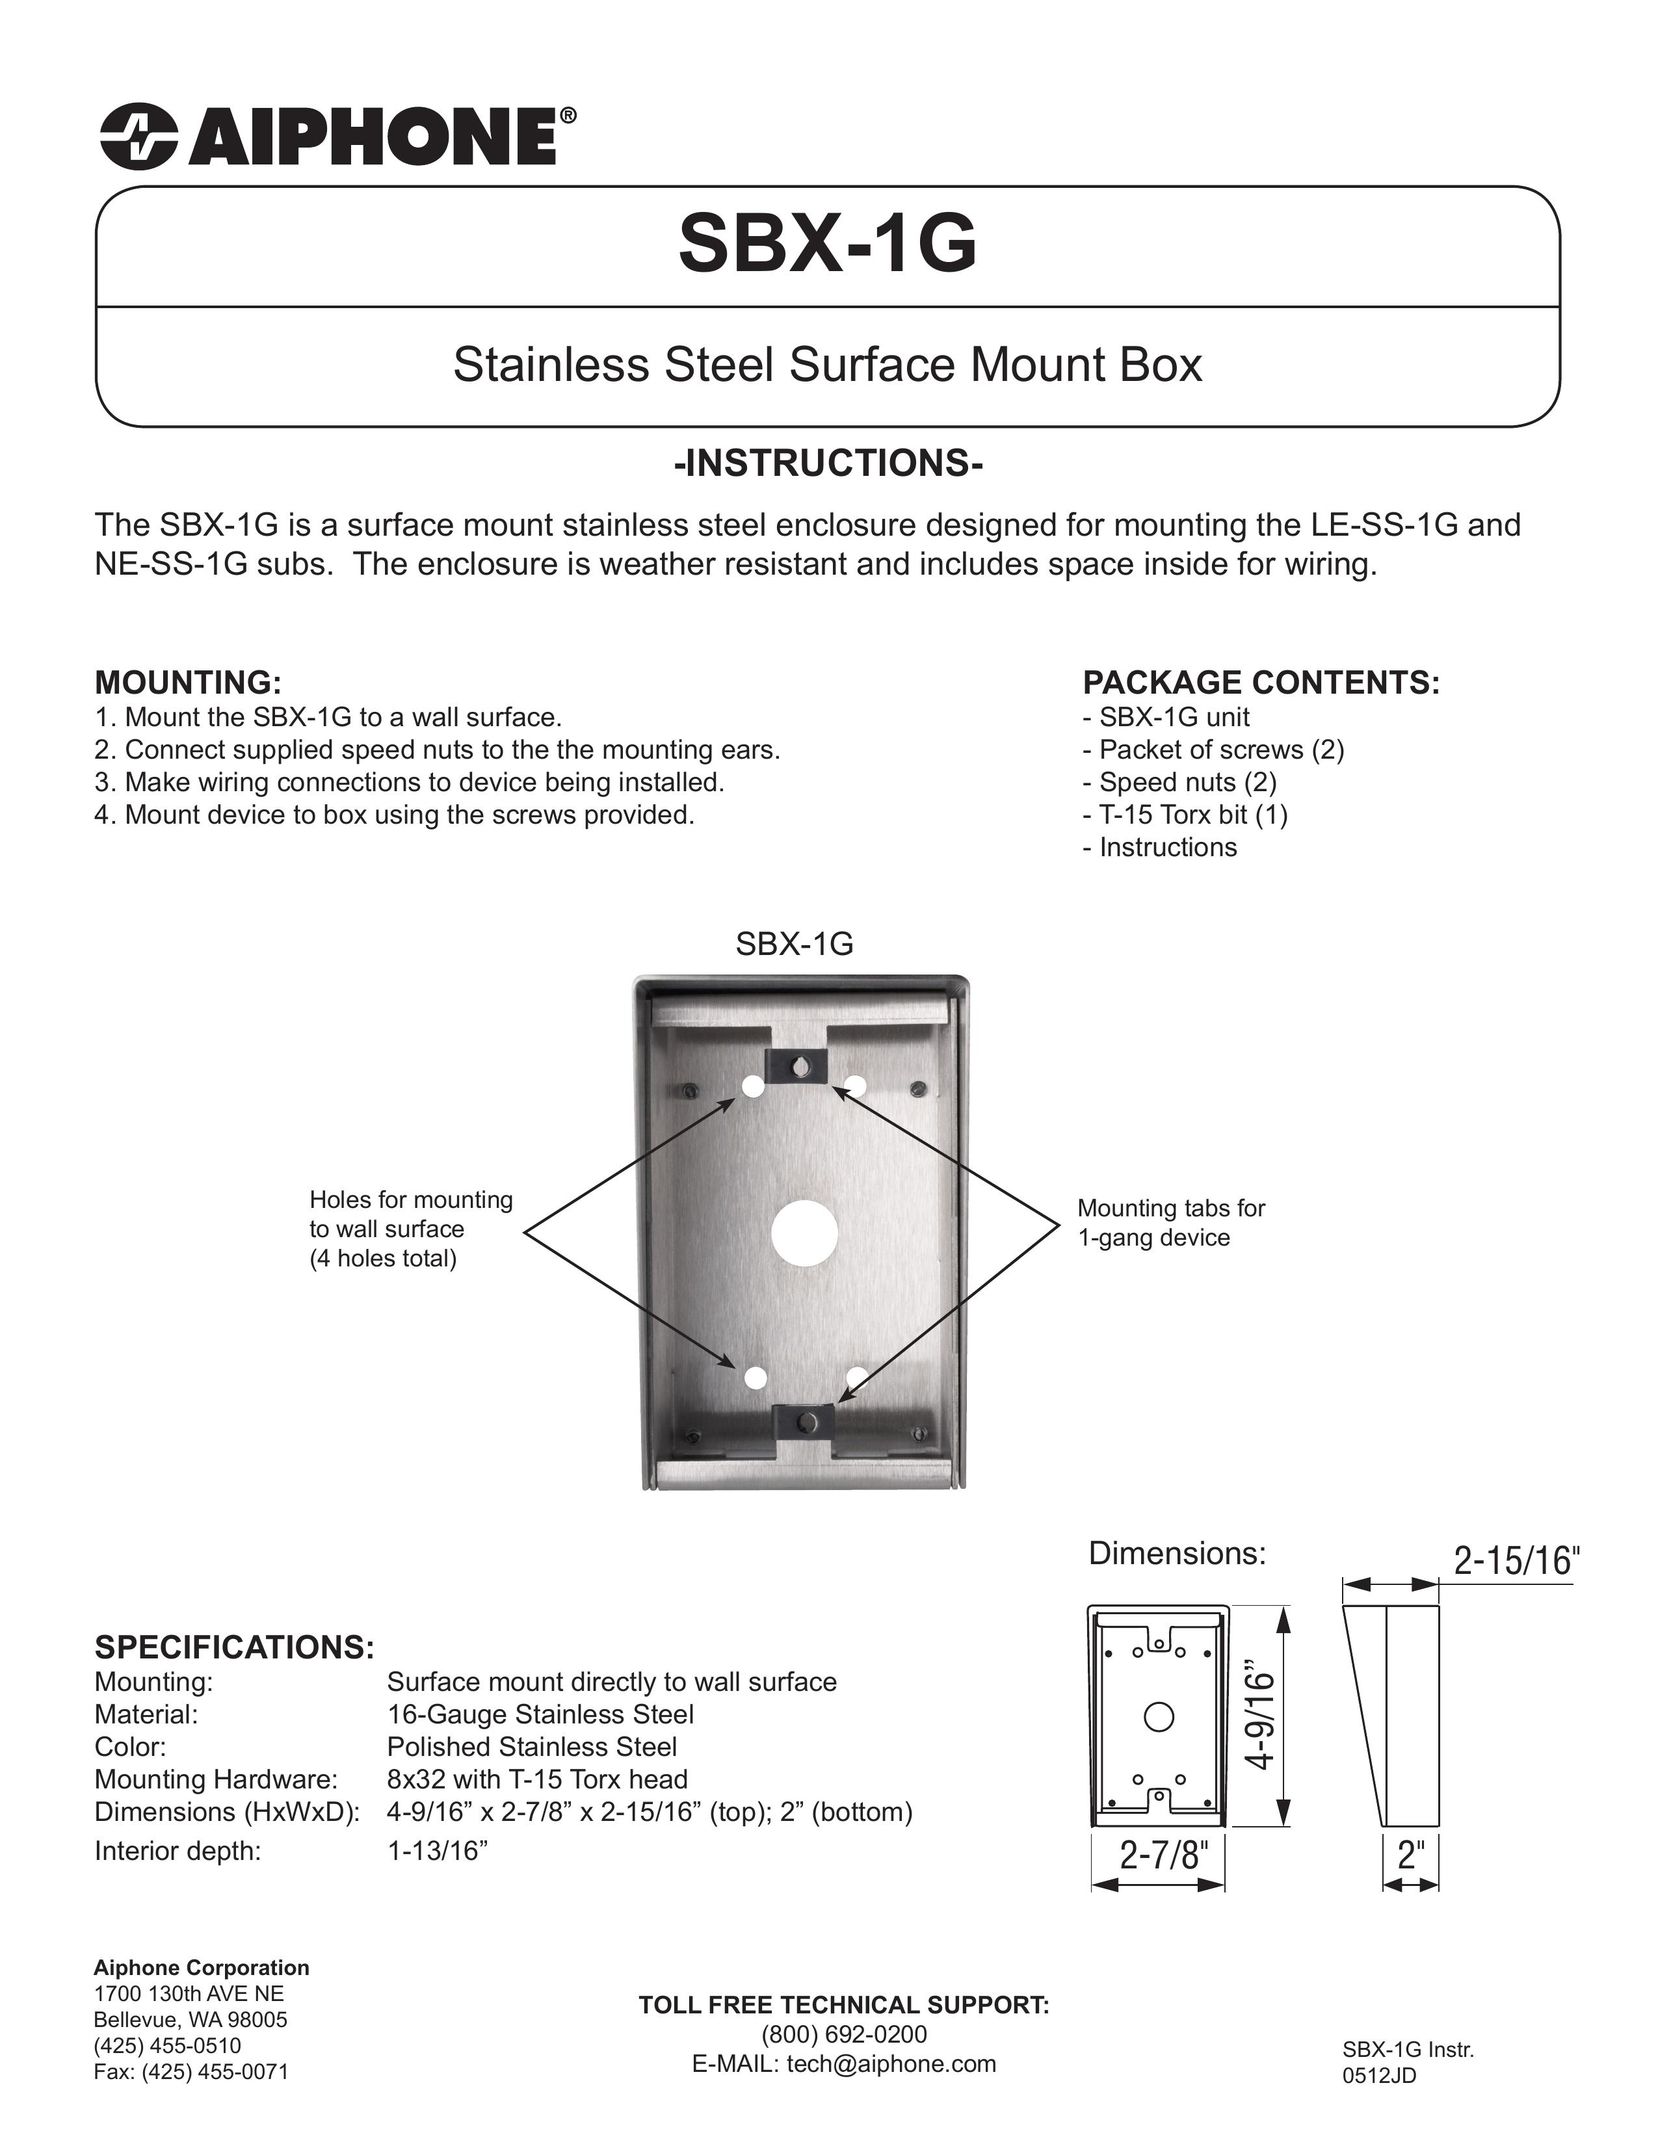 Aiphone SBX-1G Planer User Manual